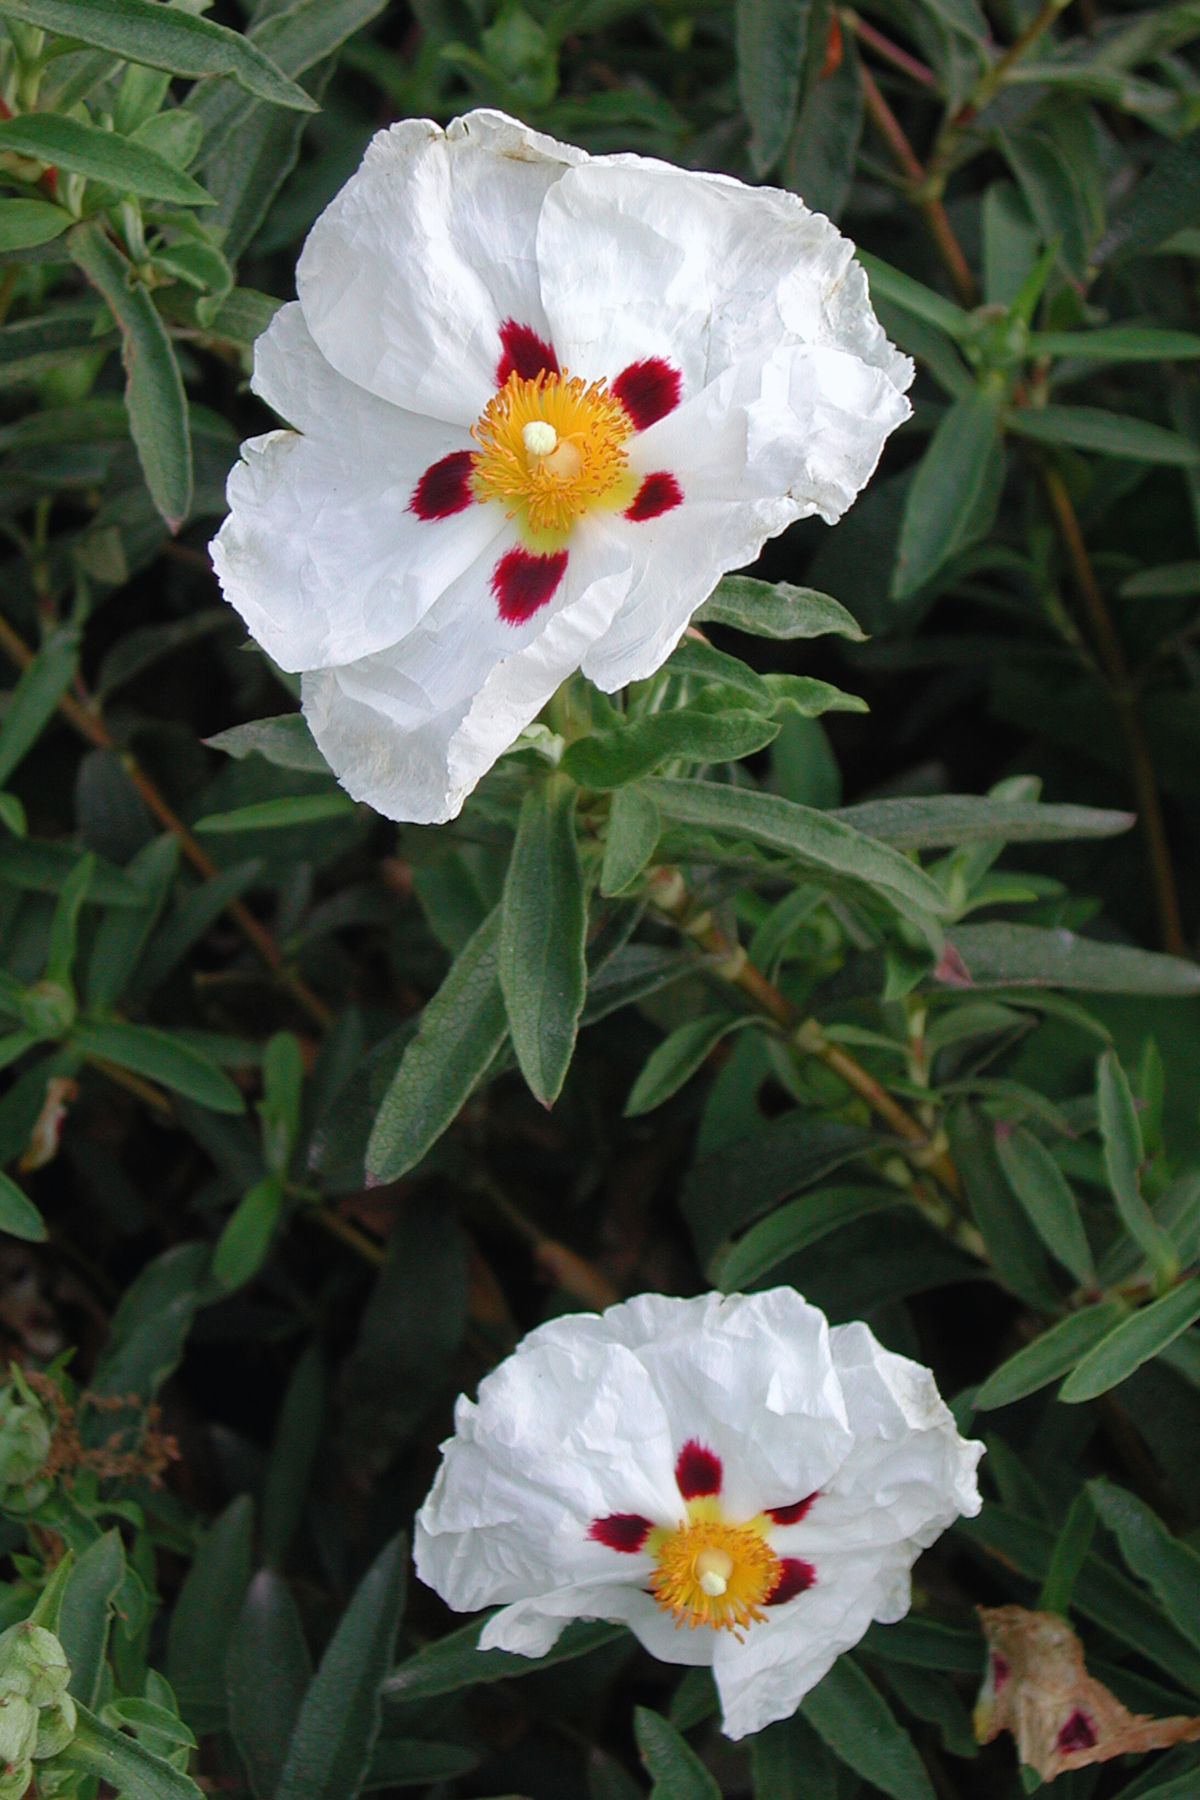 Fawn Lily Botanica | Rock Rose, also known as Labdanum or Cistus, Hydrosol - certified organic and preservative-free